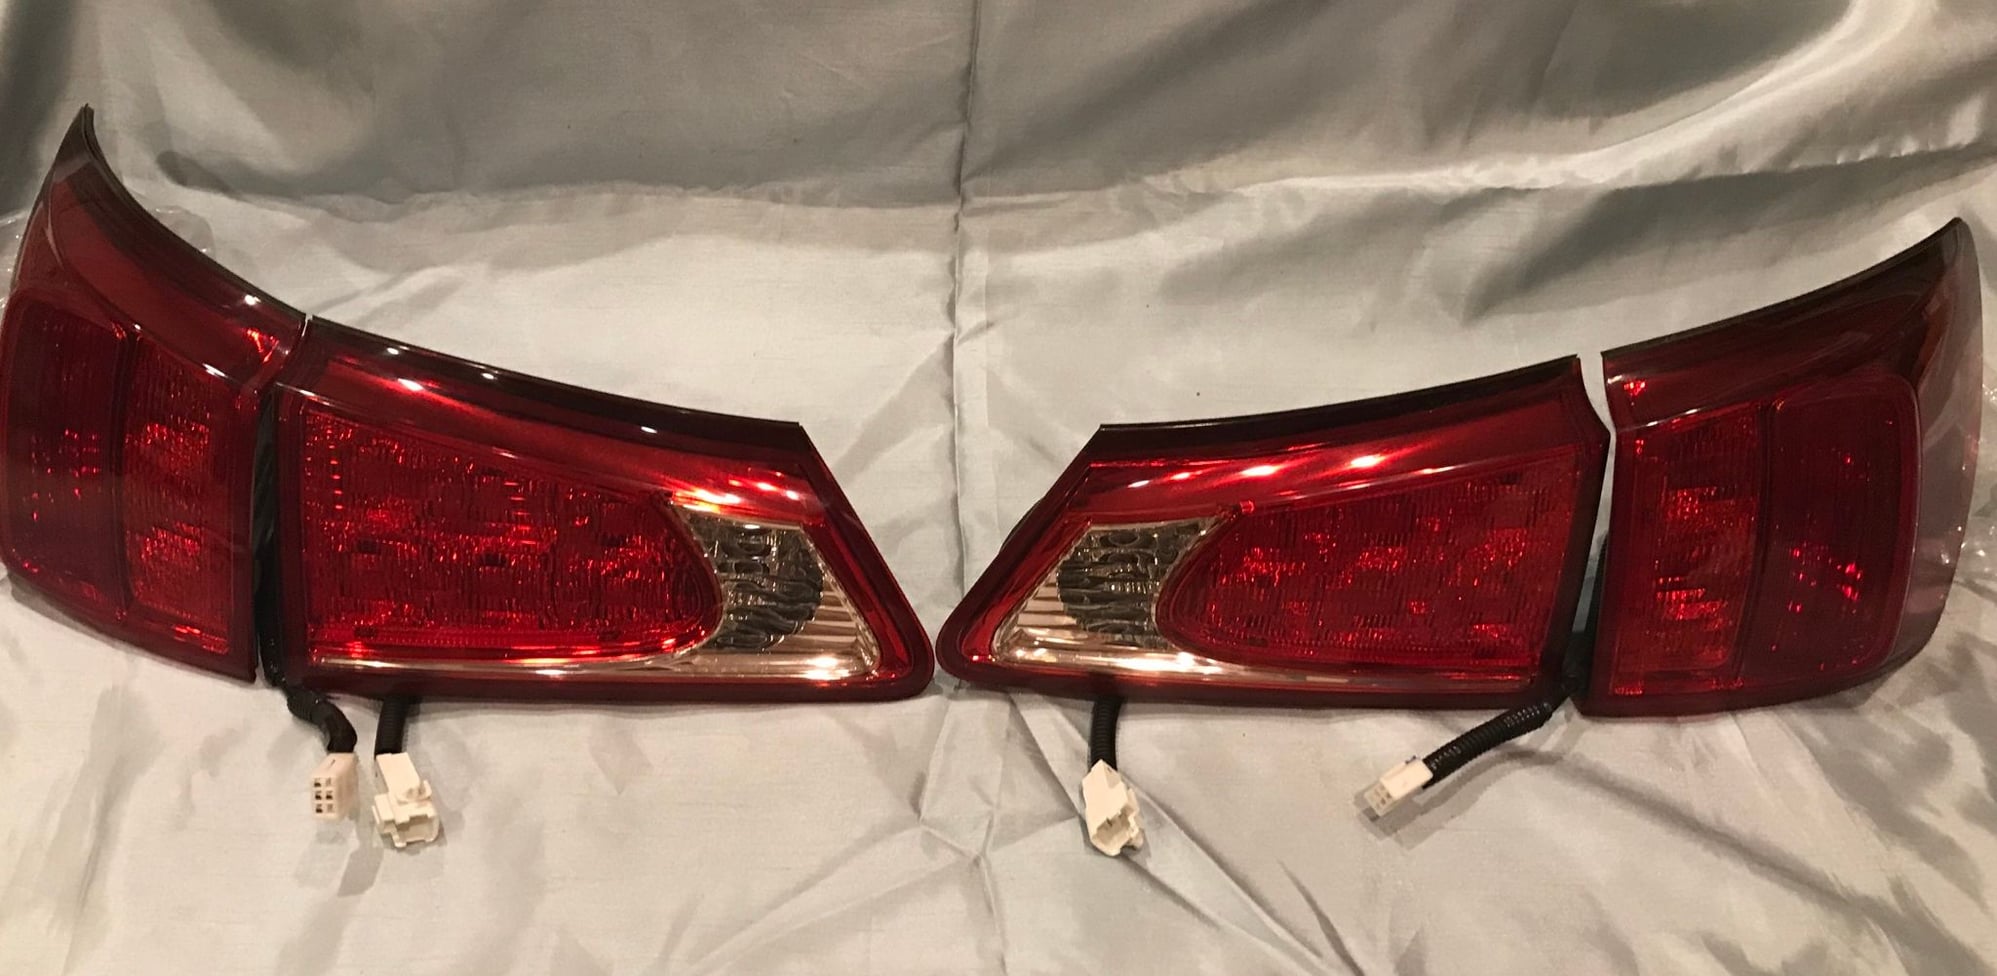 Exterior Body Parts - FS: 2009-2010 ISx50 Taillamps with Redout and BONUS - Used - 2006 to 2012 Lexus IS250 - 2006 to 2012 Lexus IS350 - Parsippany, NJ 07054, United States